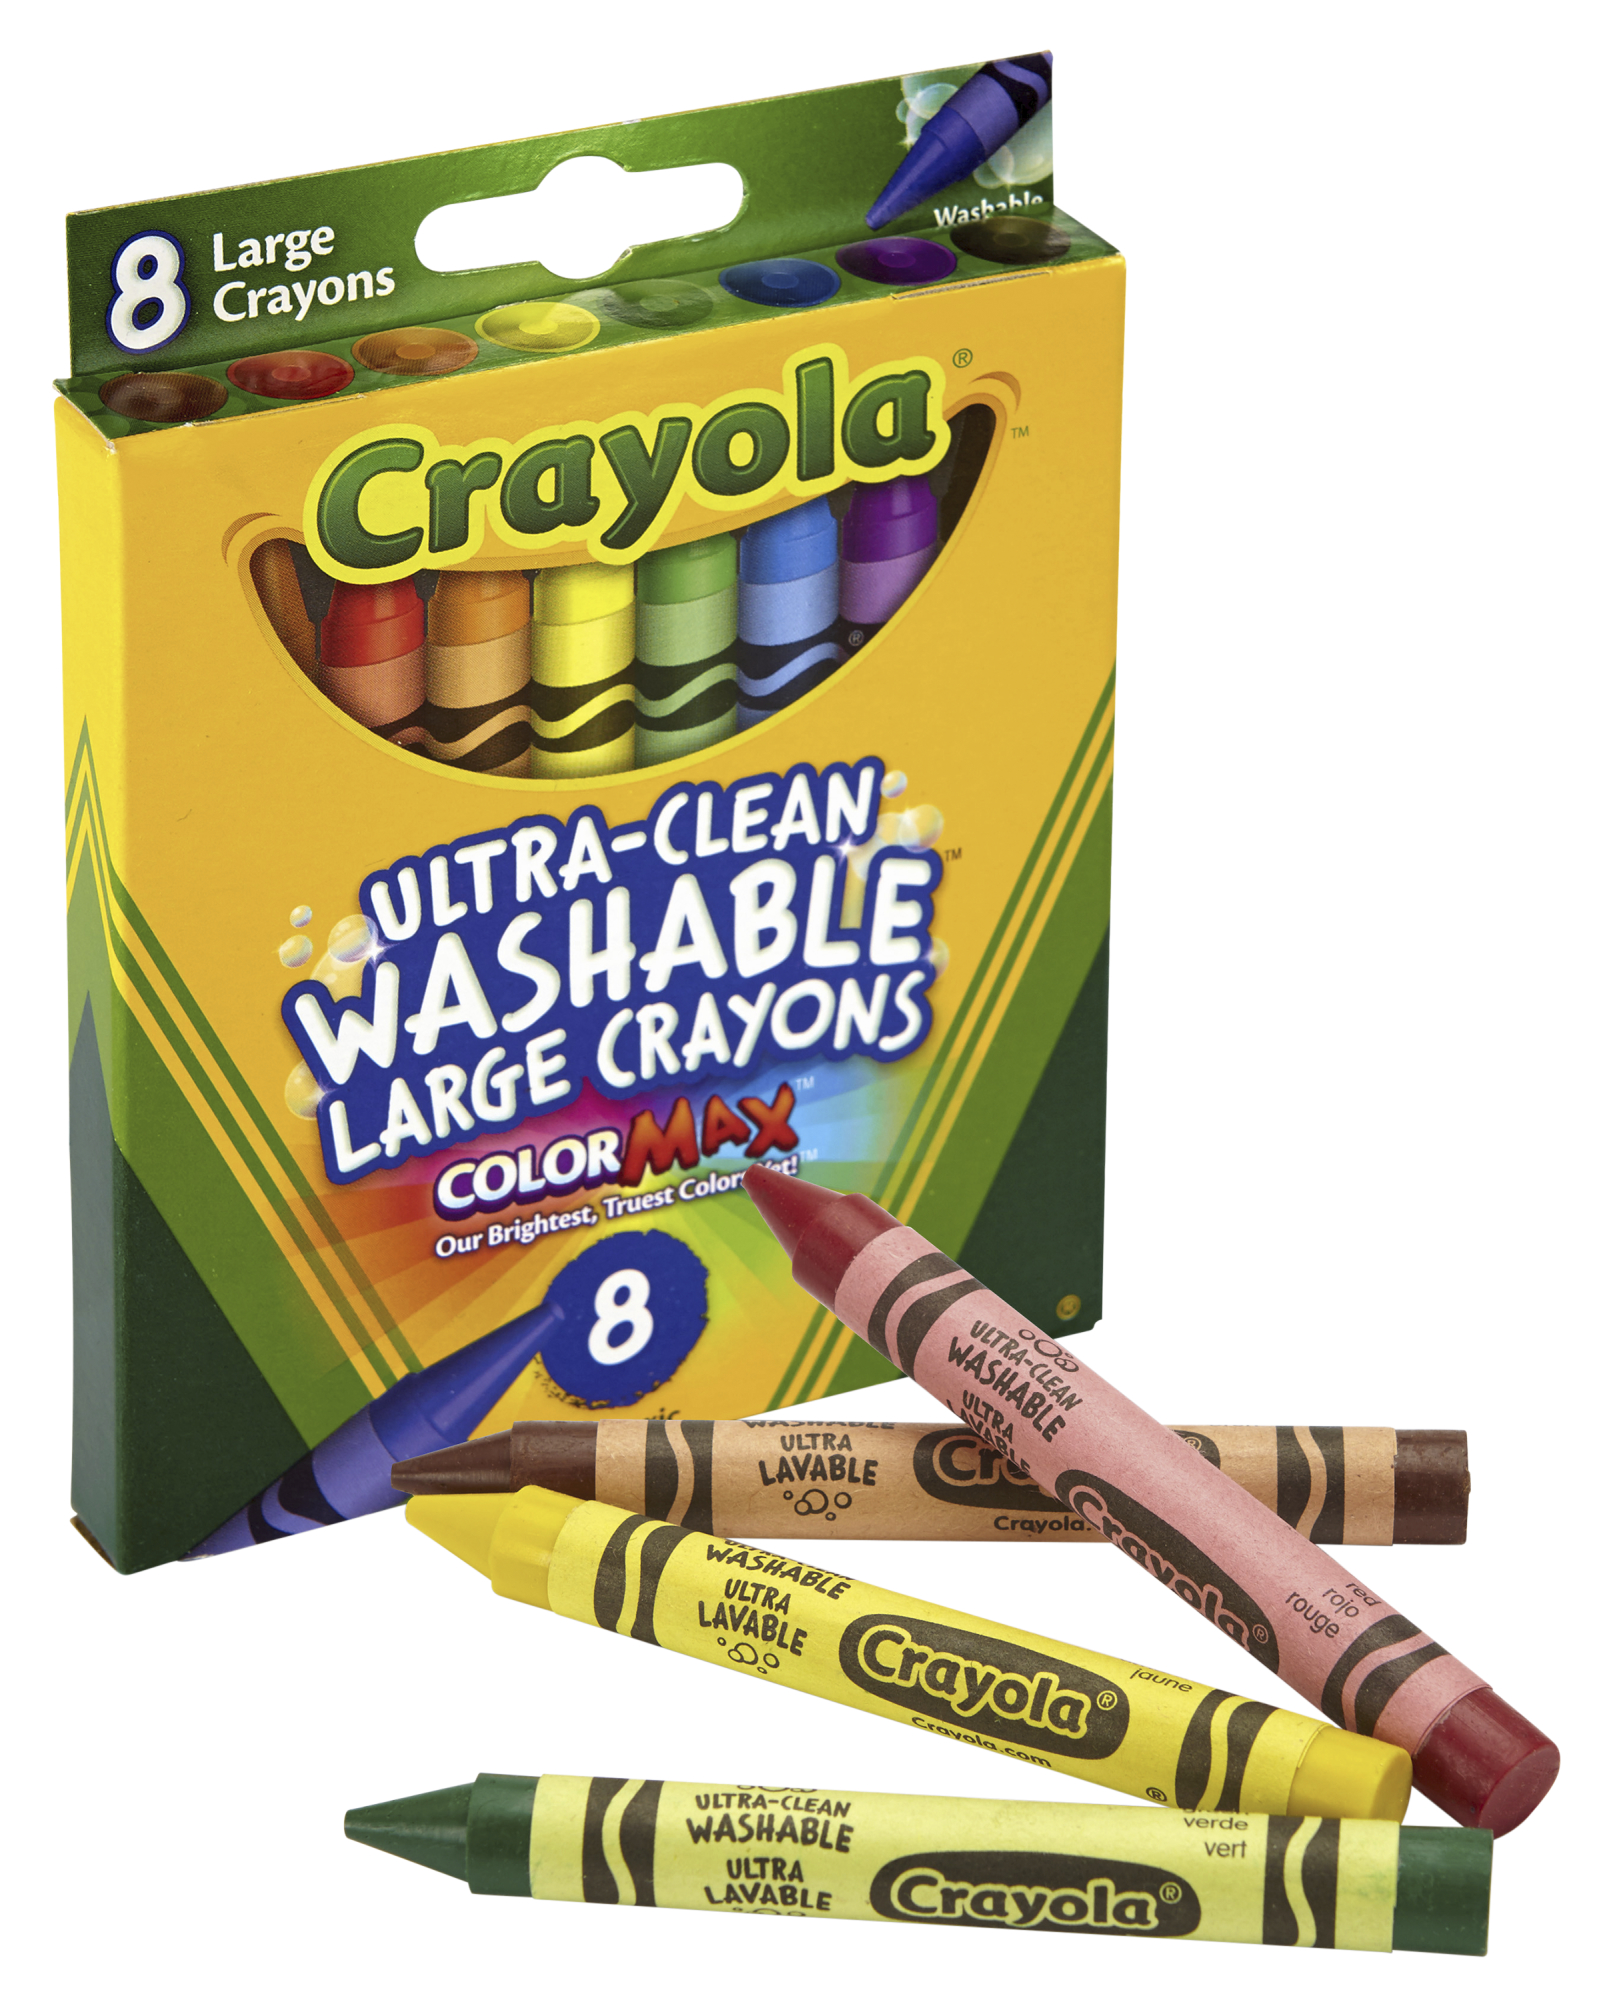 Crayola Ultra Clean Washable Color Max Crayons, Large Size, Set of 8, Multi-Color - image 5 of 6